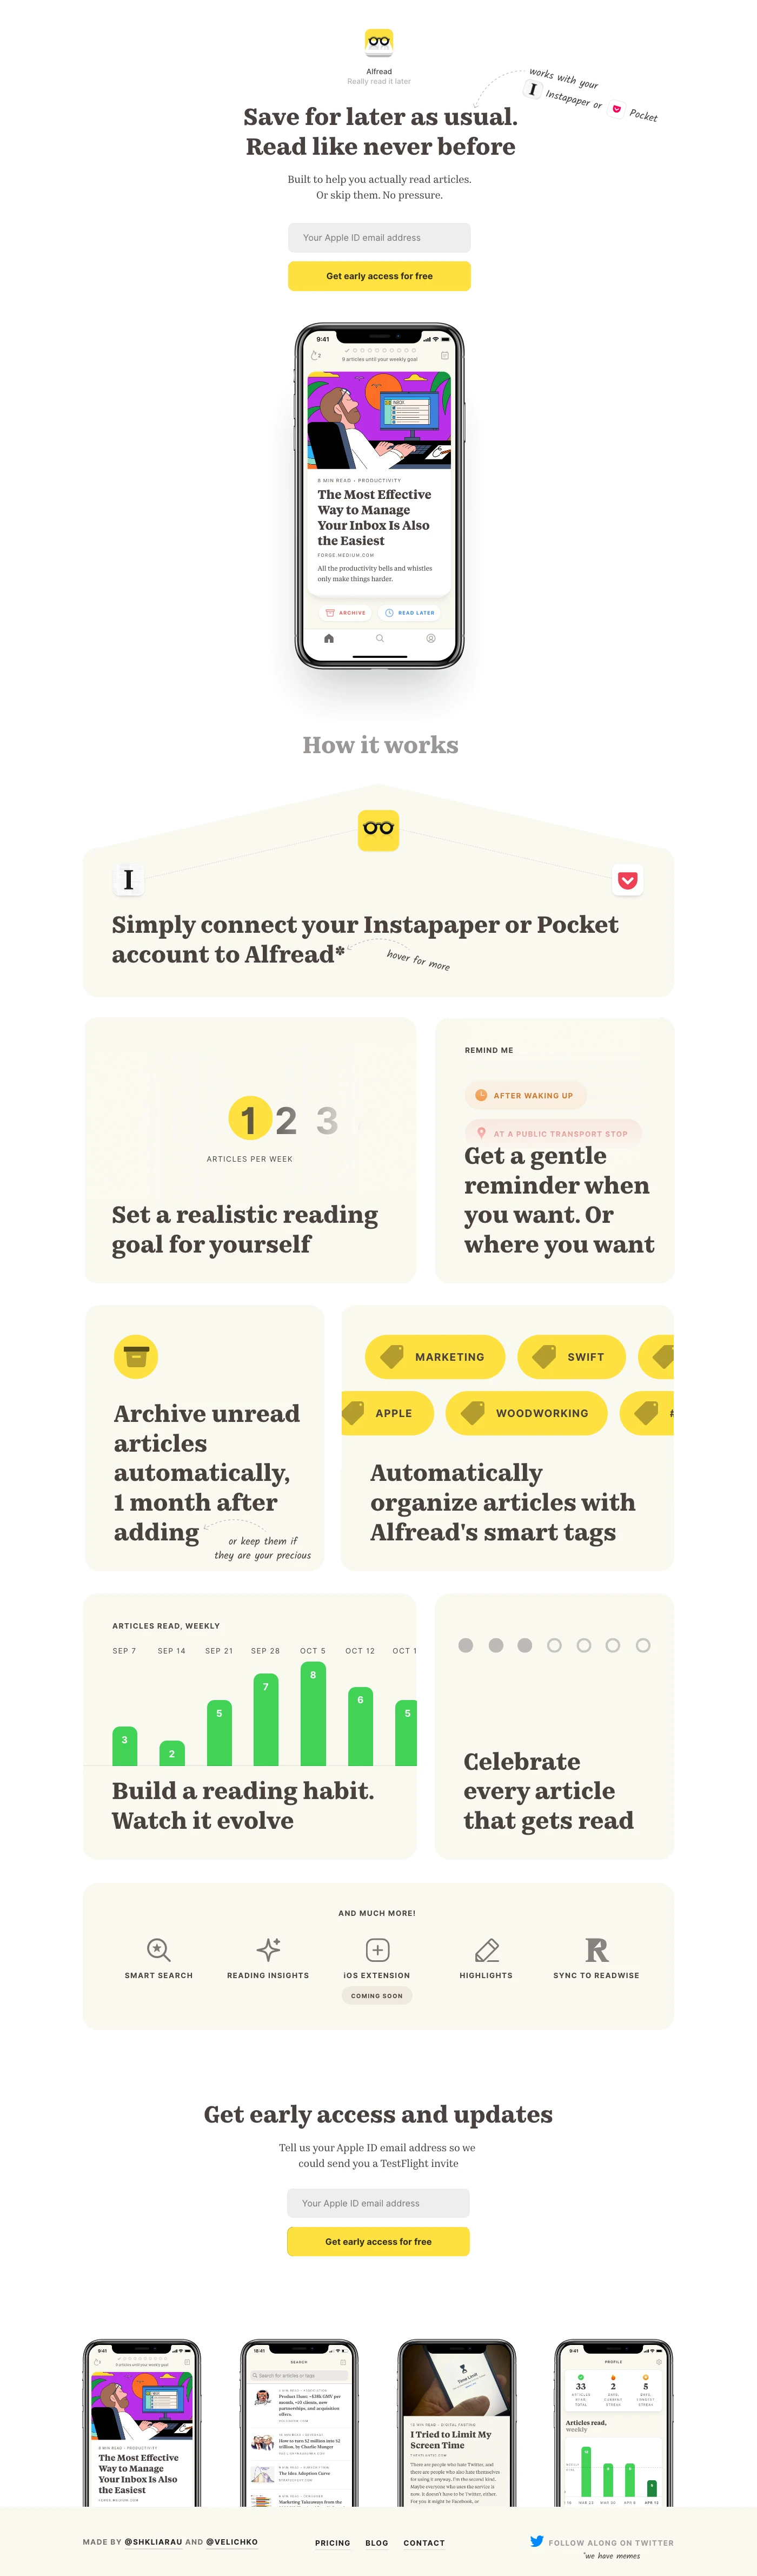 Alfread Landing Page Example: Make a habit of actually reading saved articles from your Pocket or Instapaper. Or skip them. No pressure.